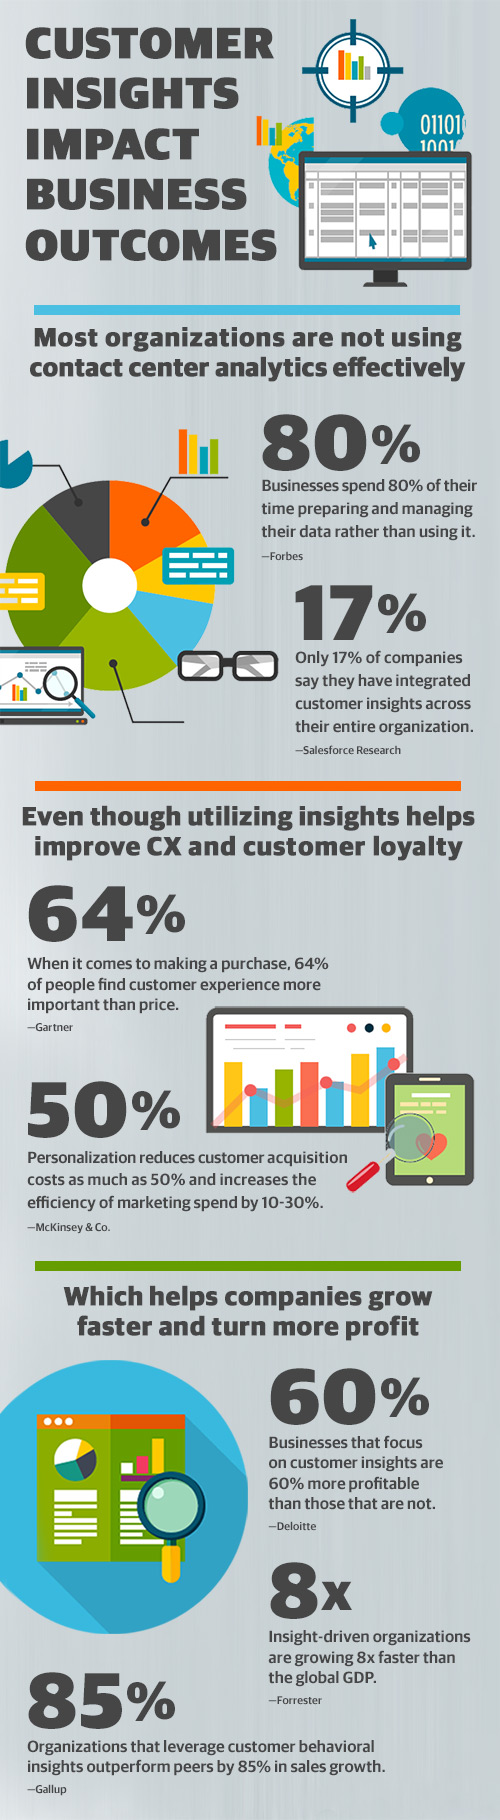 Infographic showing the impact of utilizing customer and call center analytics insights to optimize business operations and increase customer lifetime value